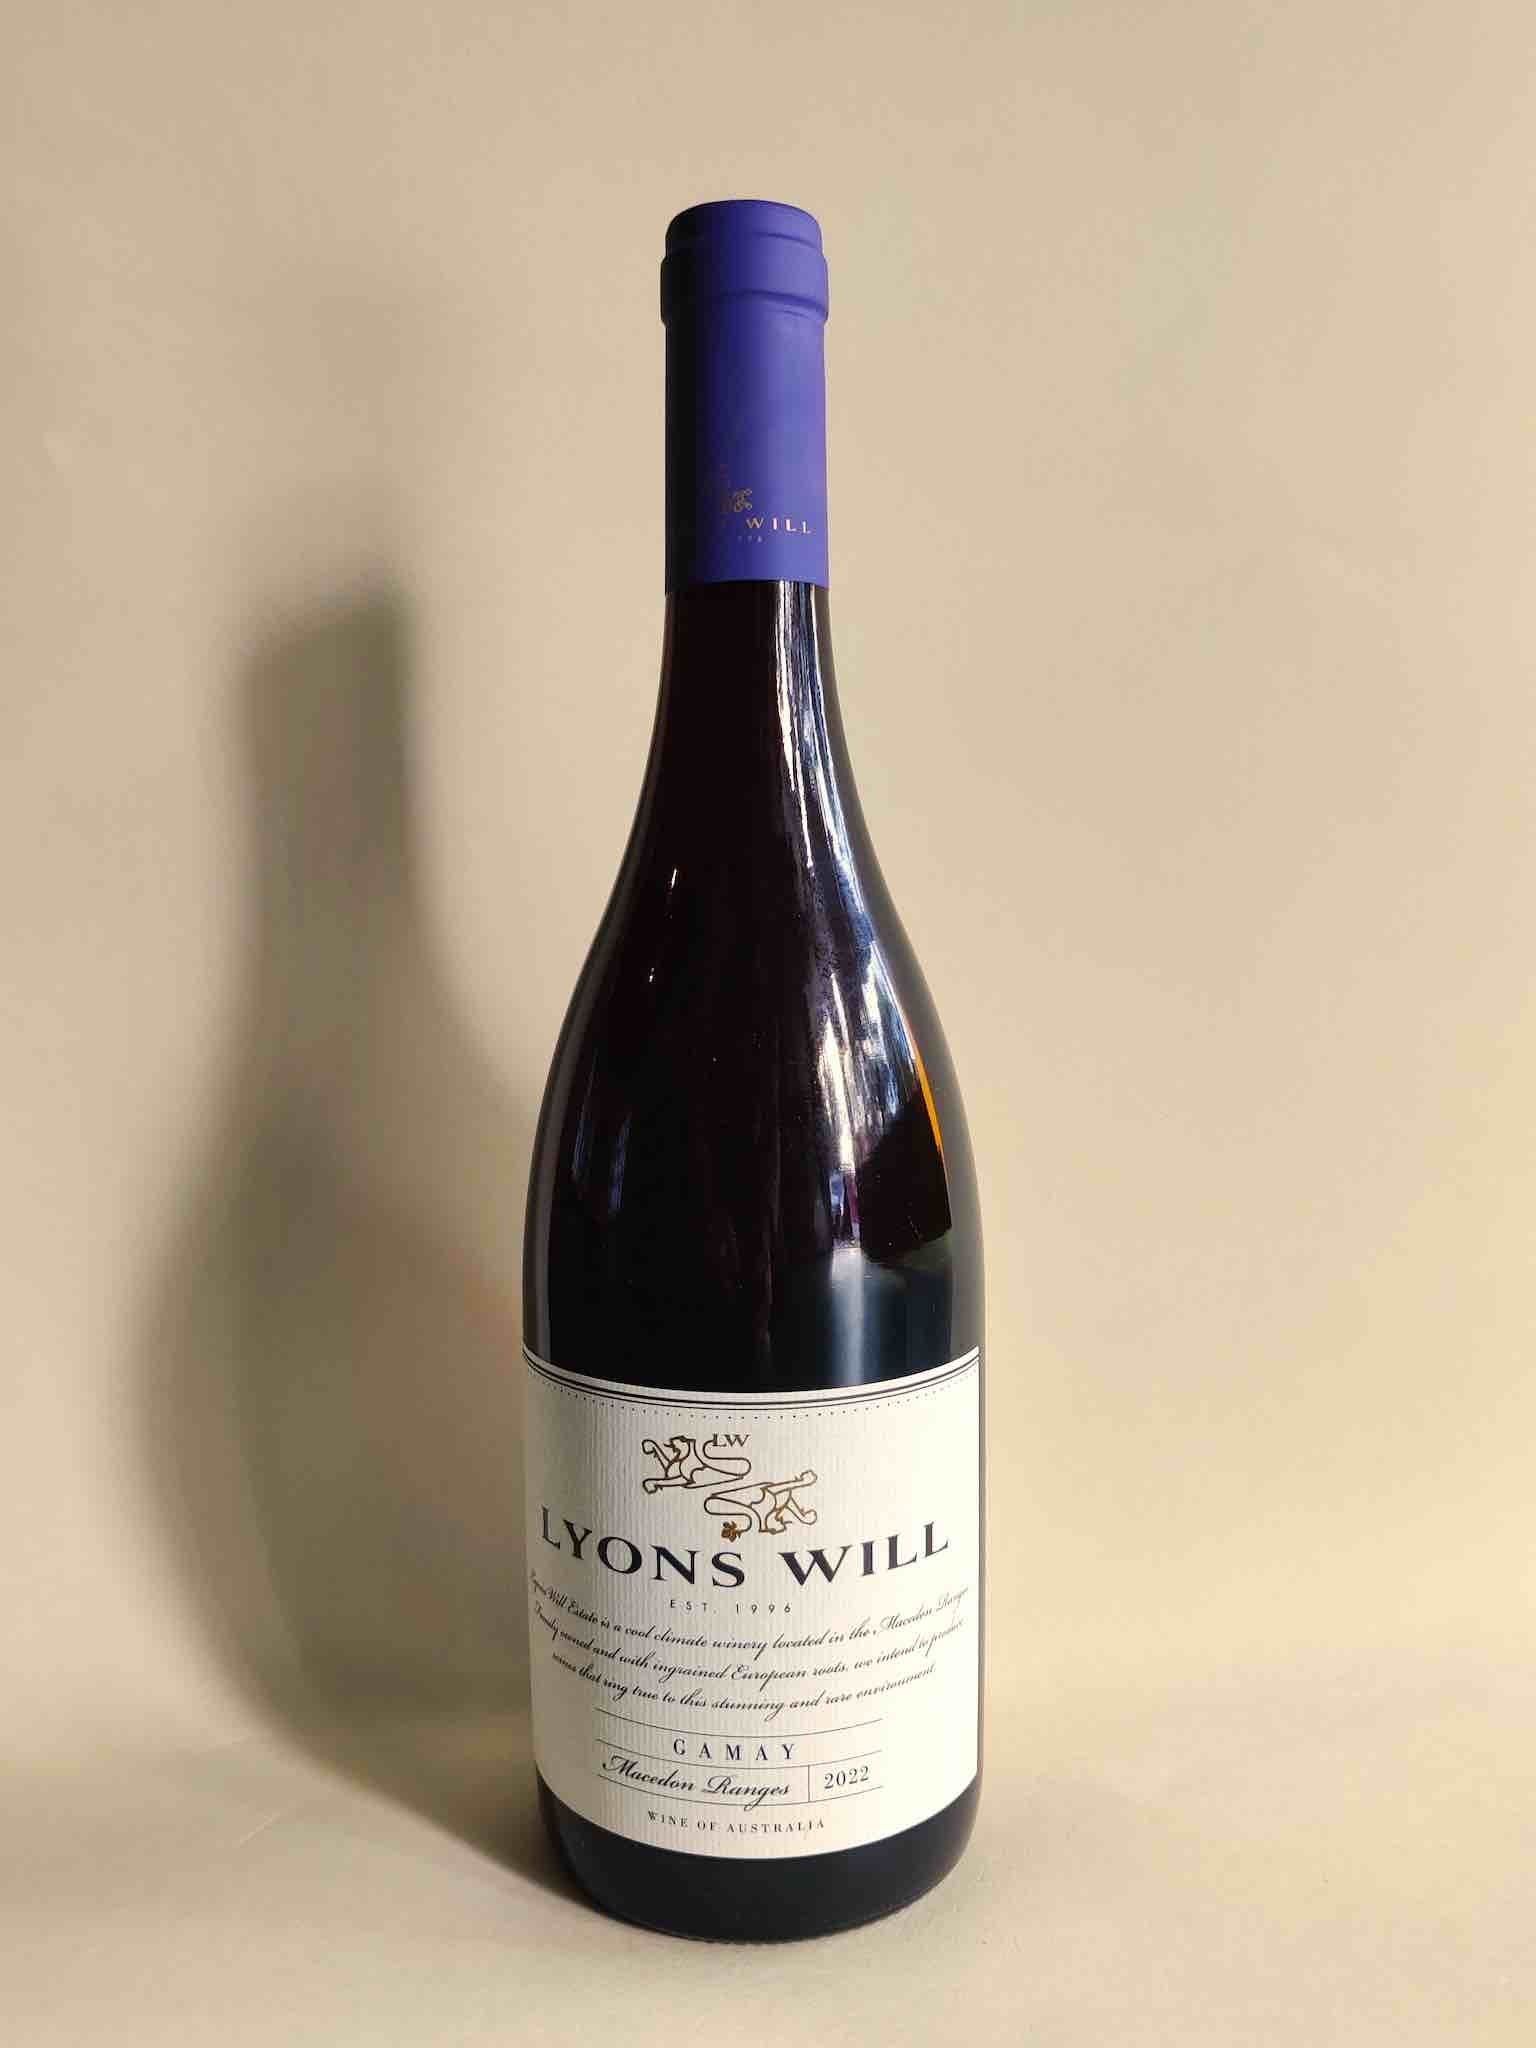 A 750ml bottle of Lyons Will Gamay red wine from the Macedon Ranges, Victoria.